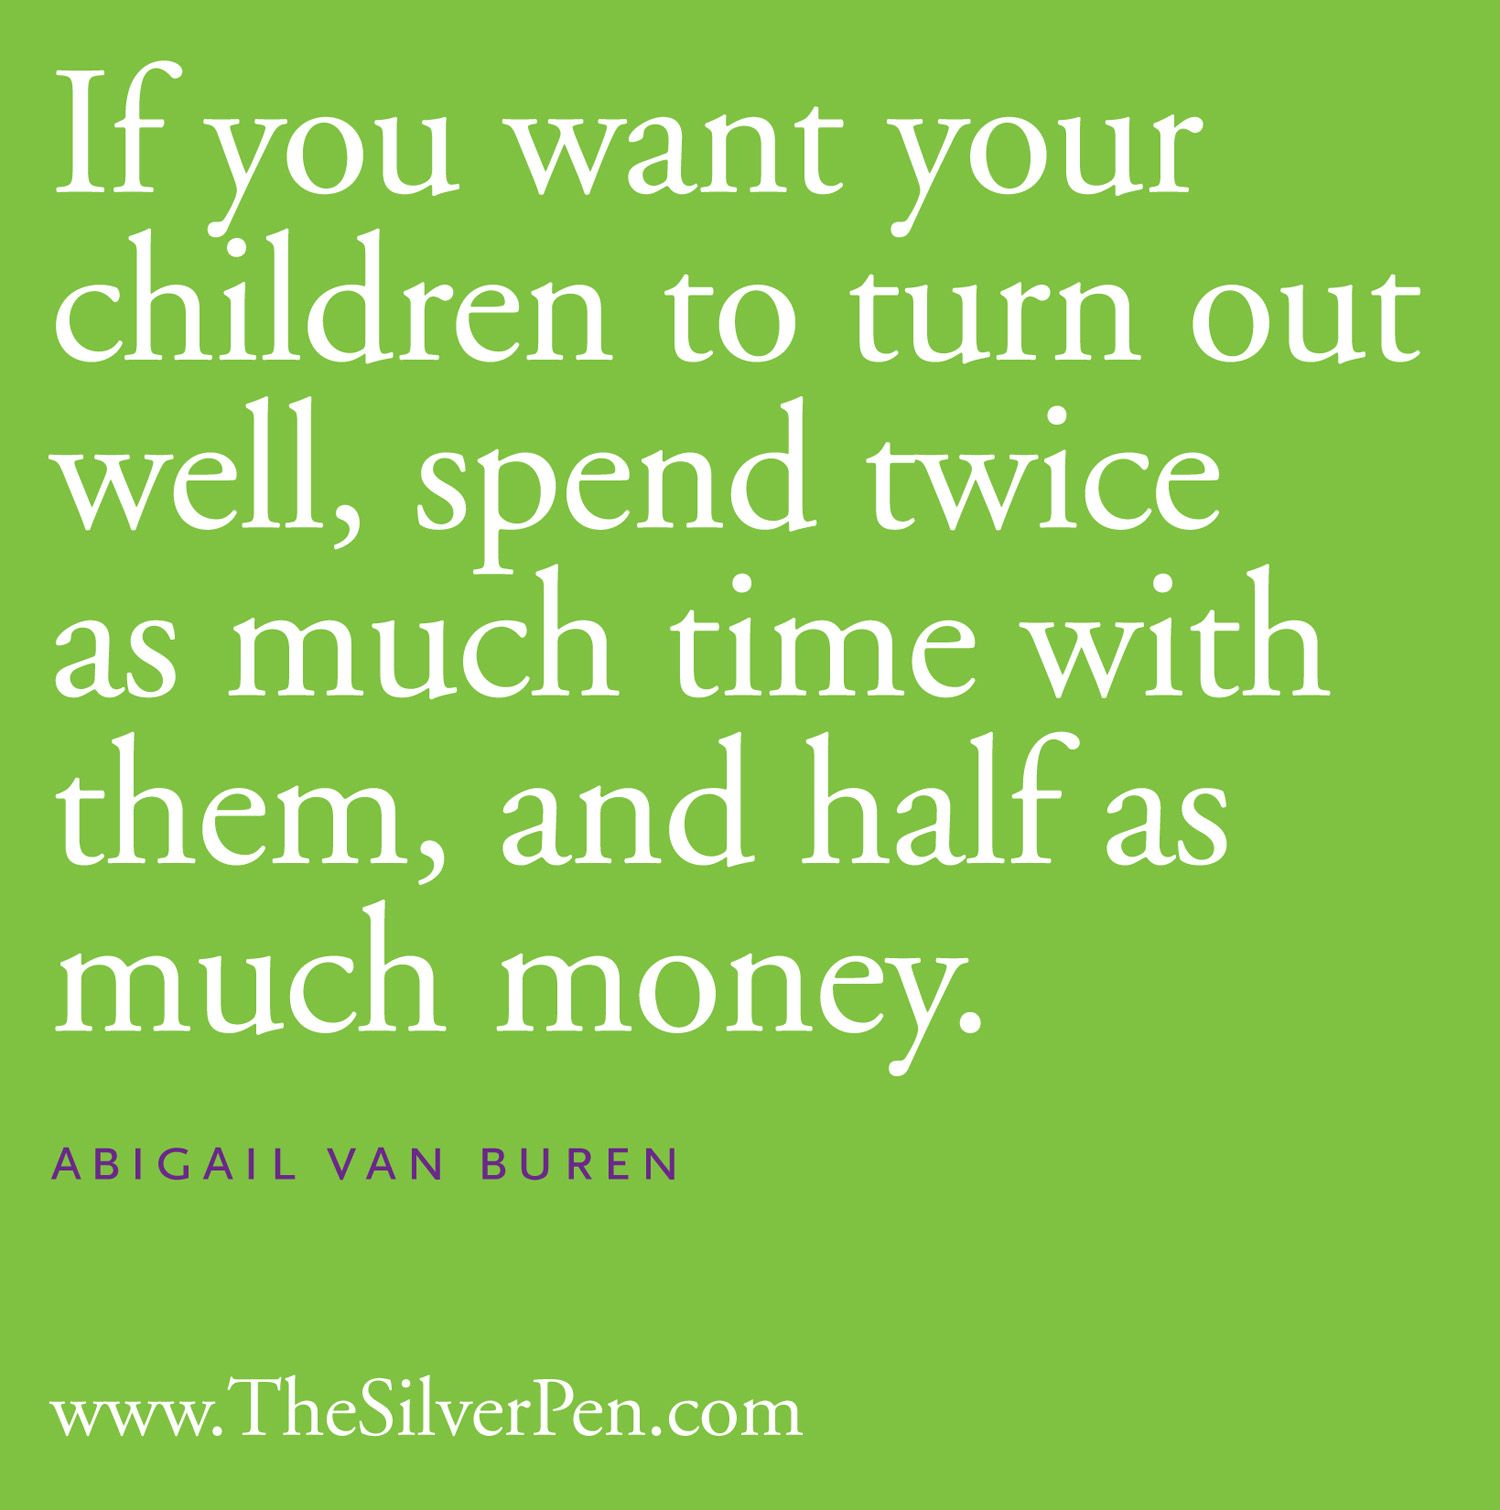 Children turn out well=more time, less money. Good!